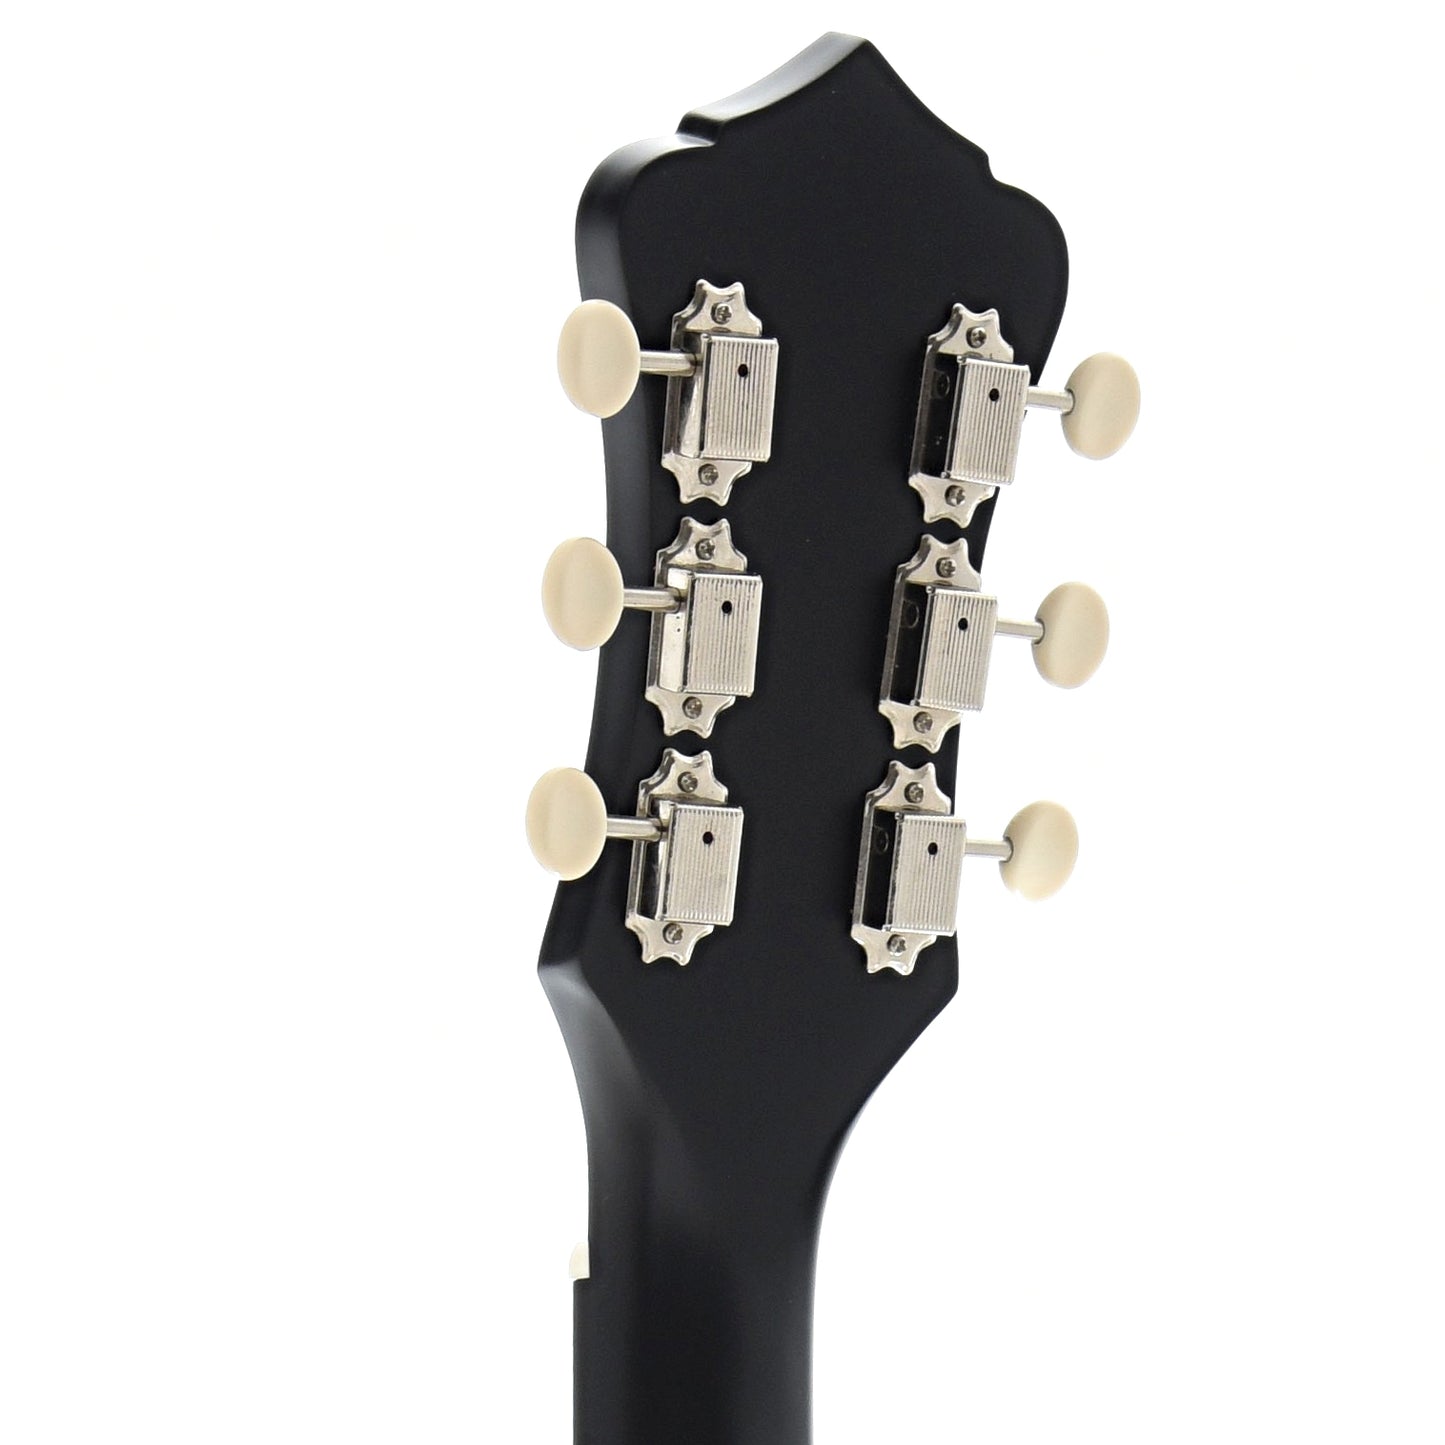 Back Headstock of Recording King Dirty 30's Series 7 12-Fret Single 0 Guitar